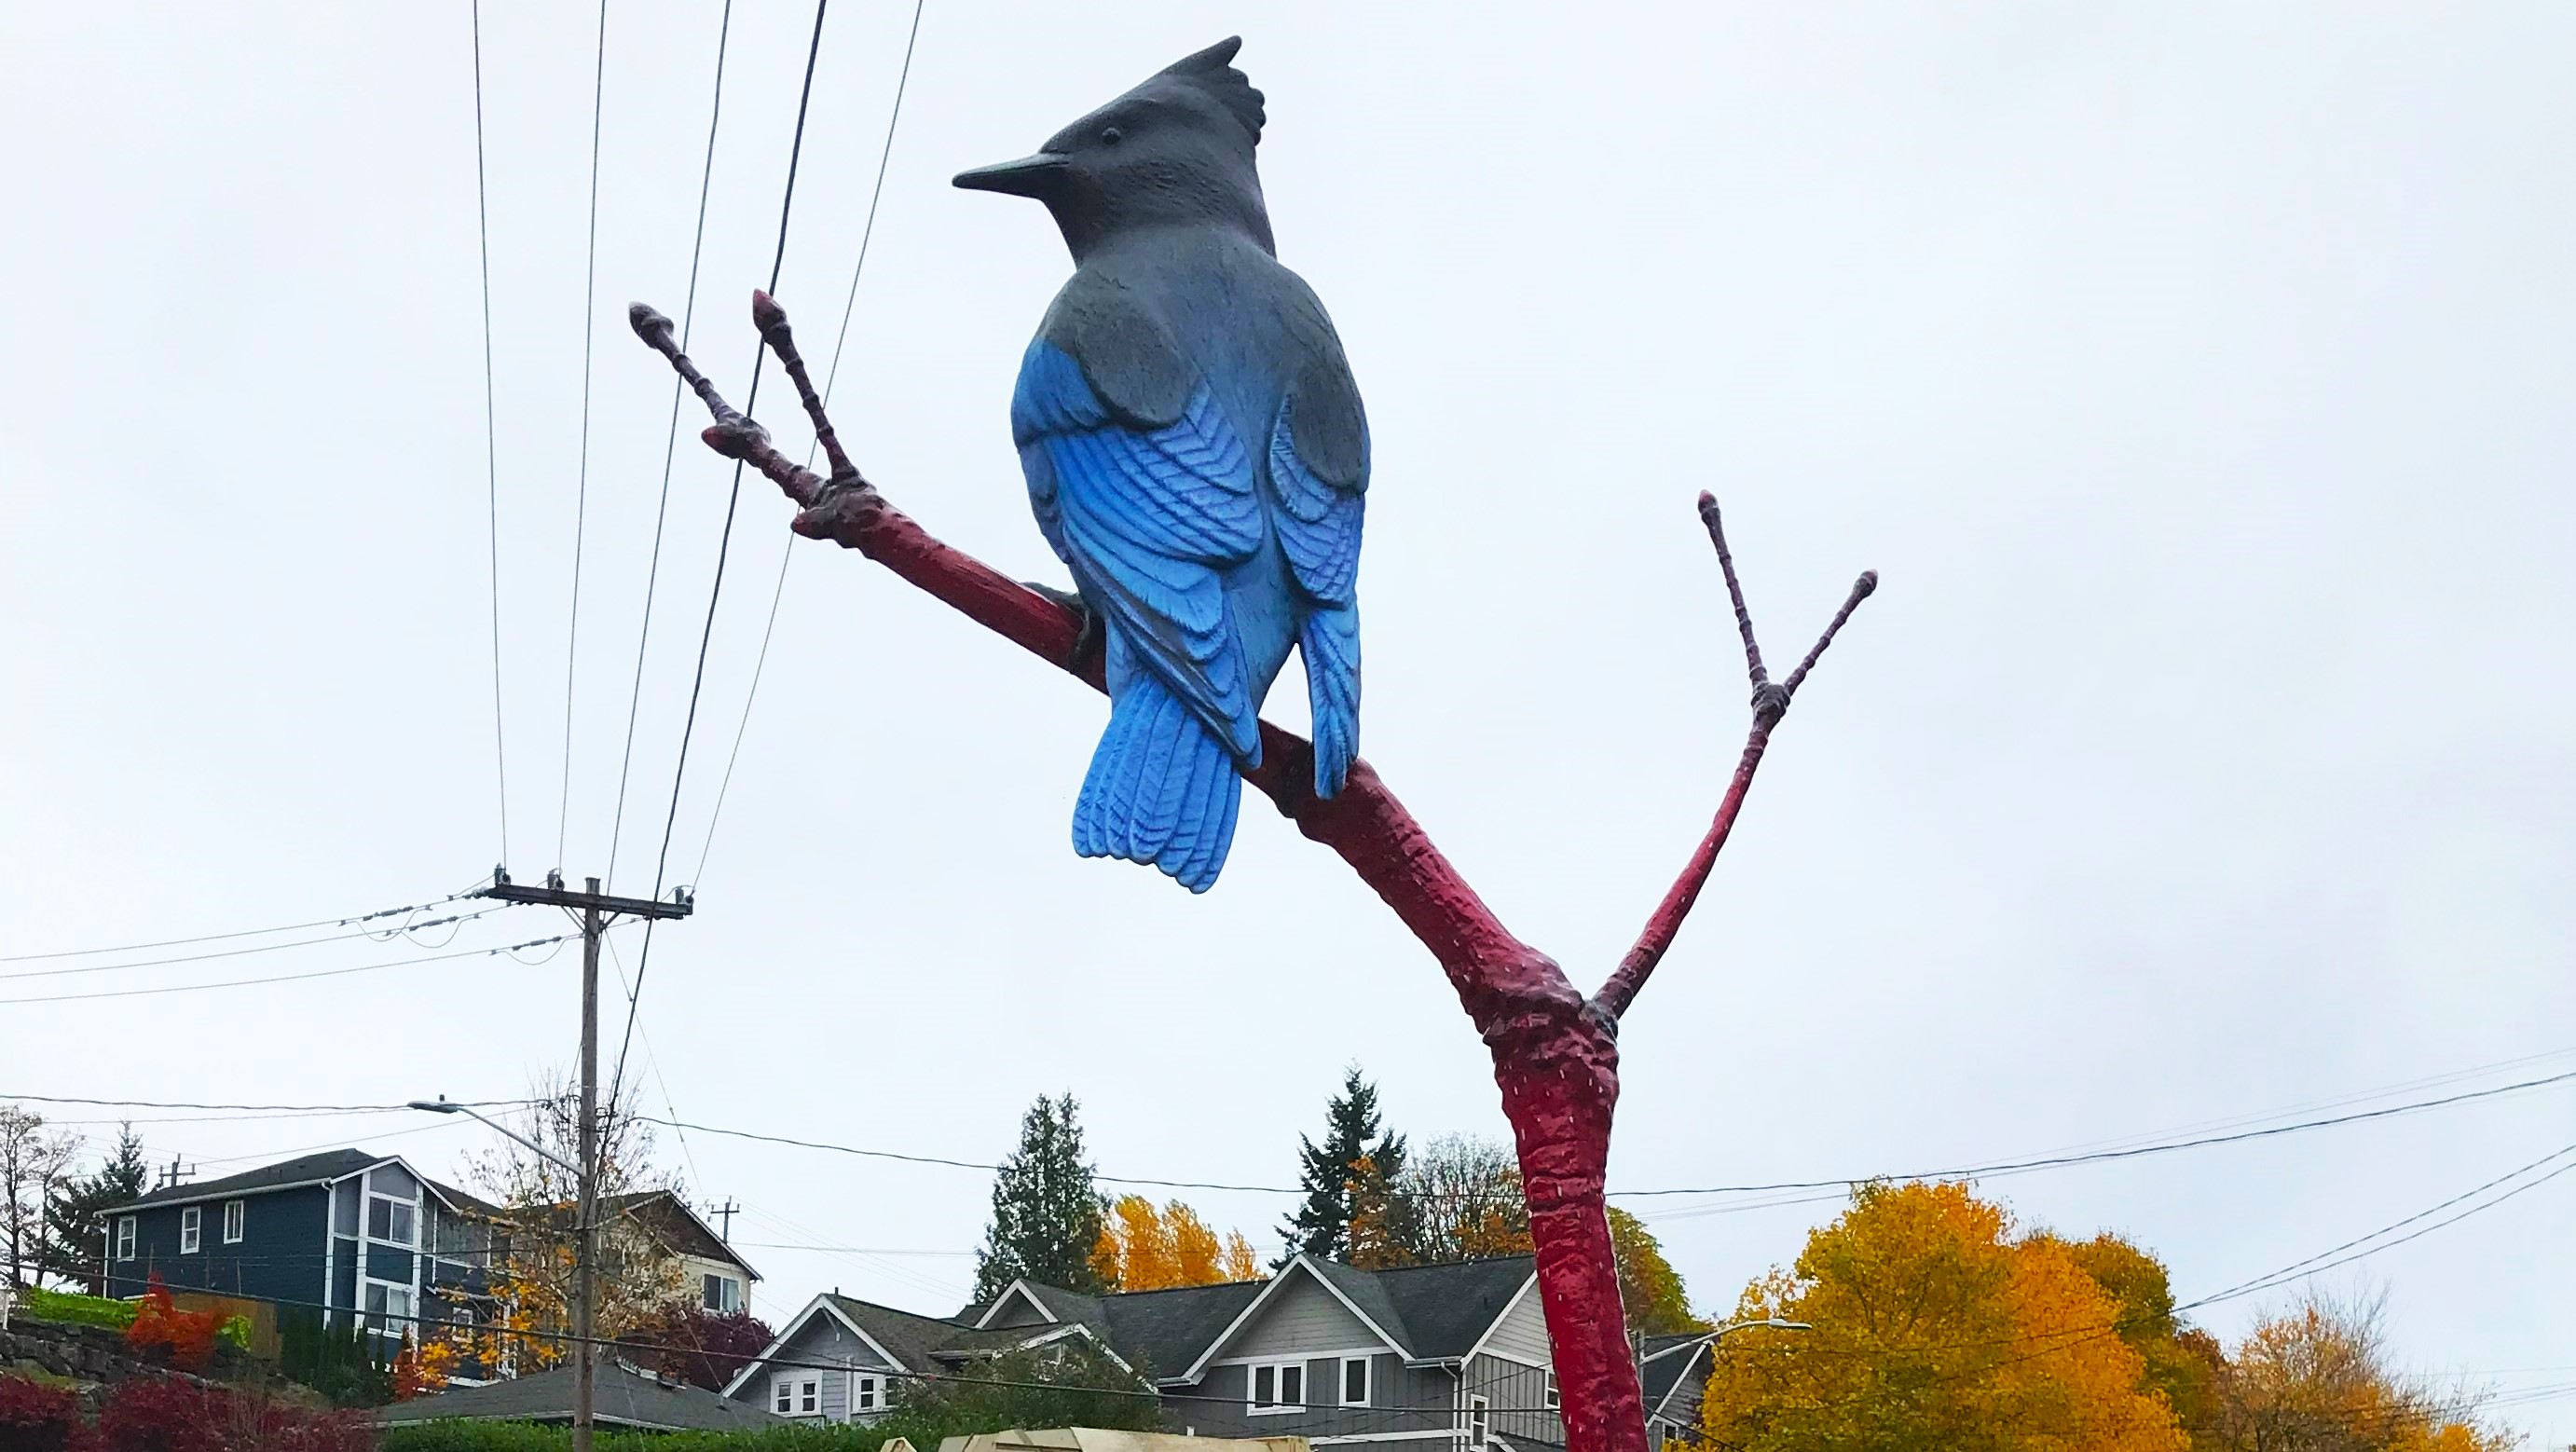 17-foot tall sculpture of a Steller's jay at the corner of Highland Park Way Southwest and Southwest Holden Street